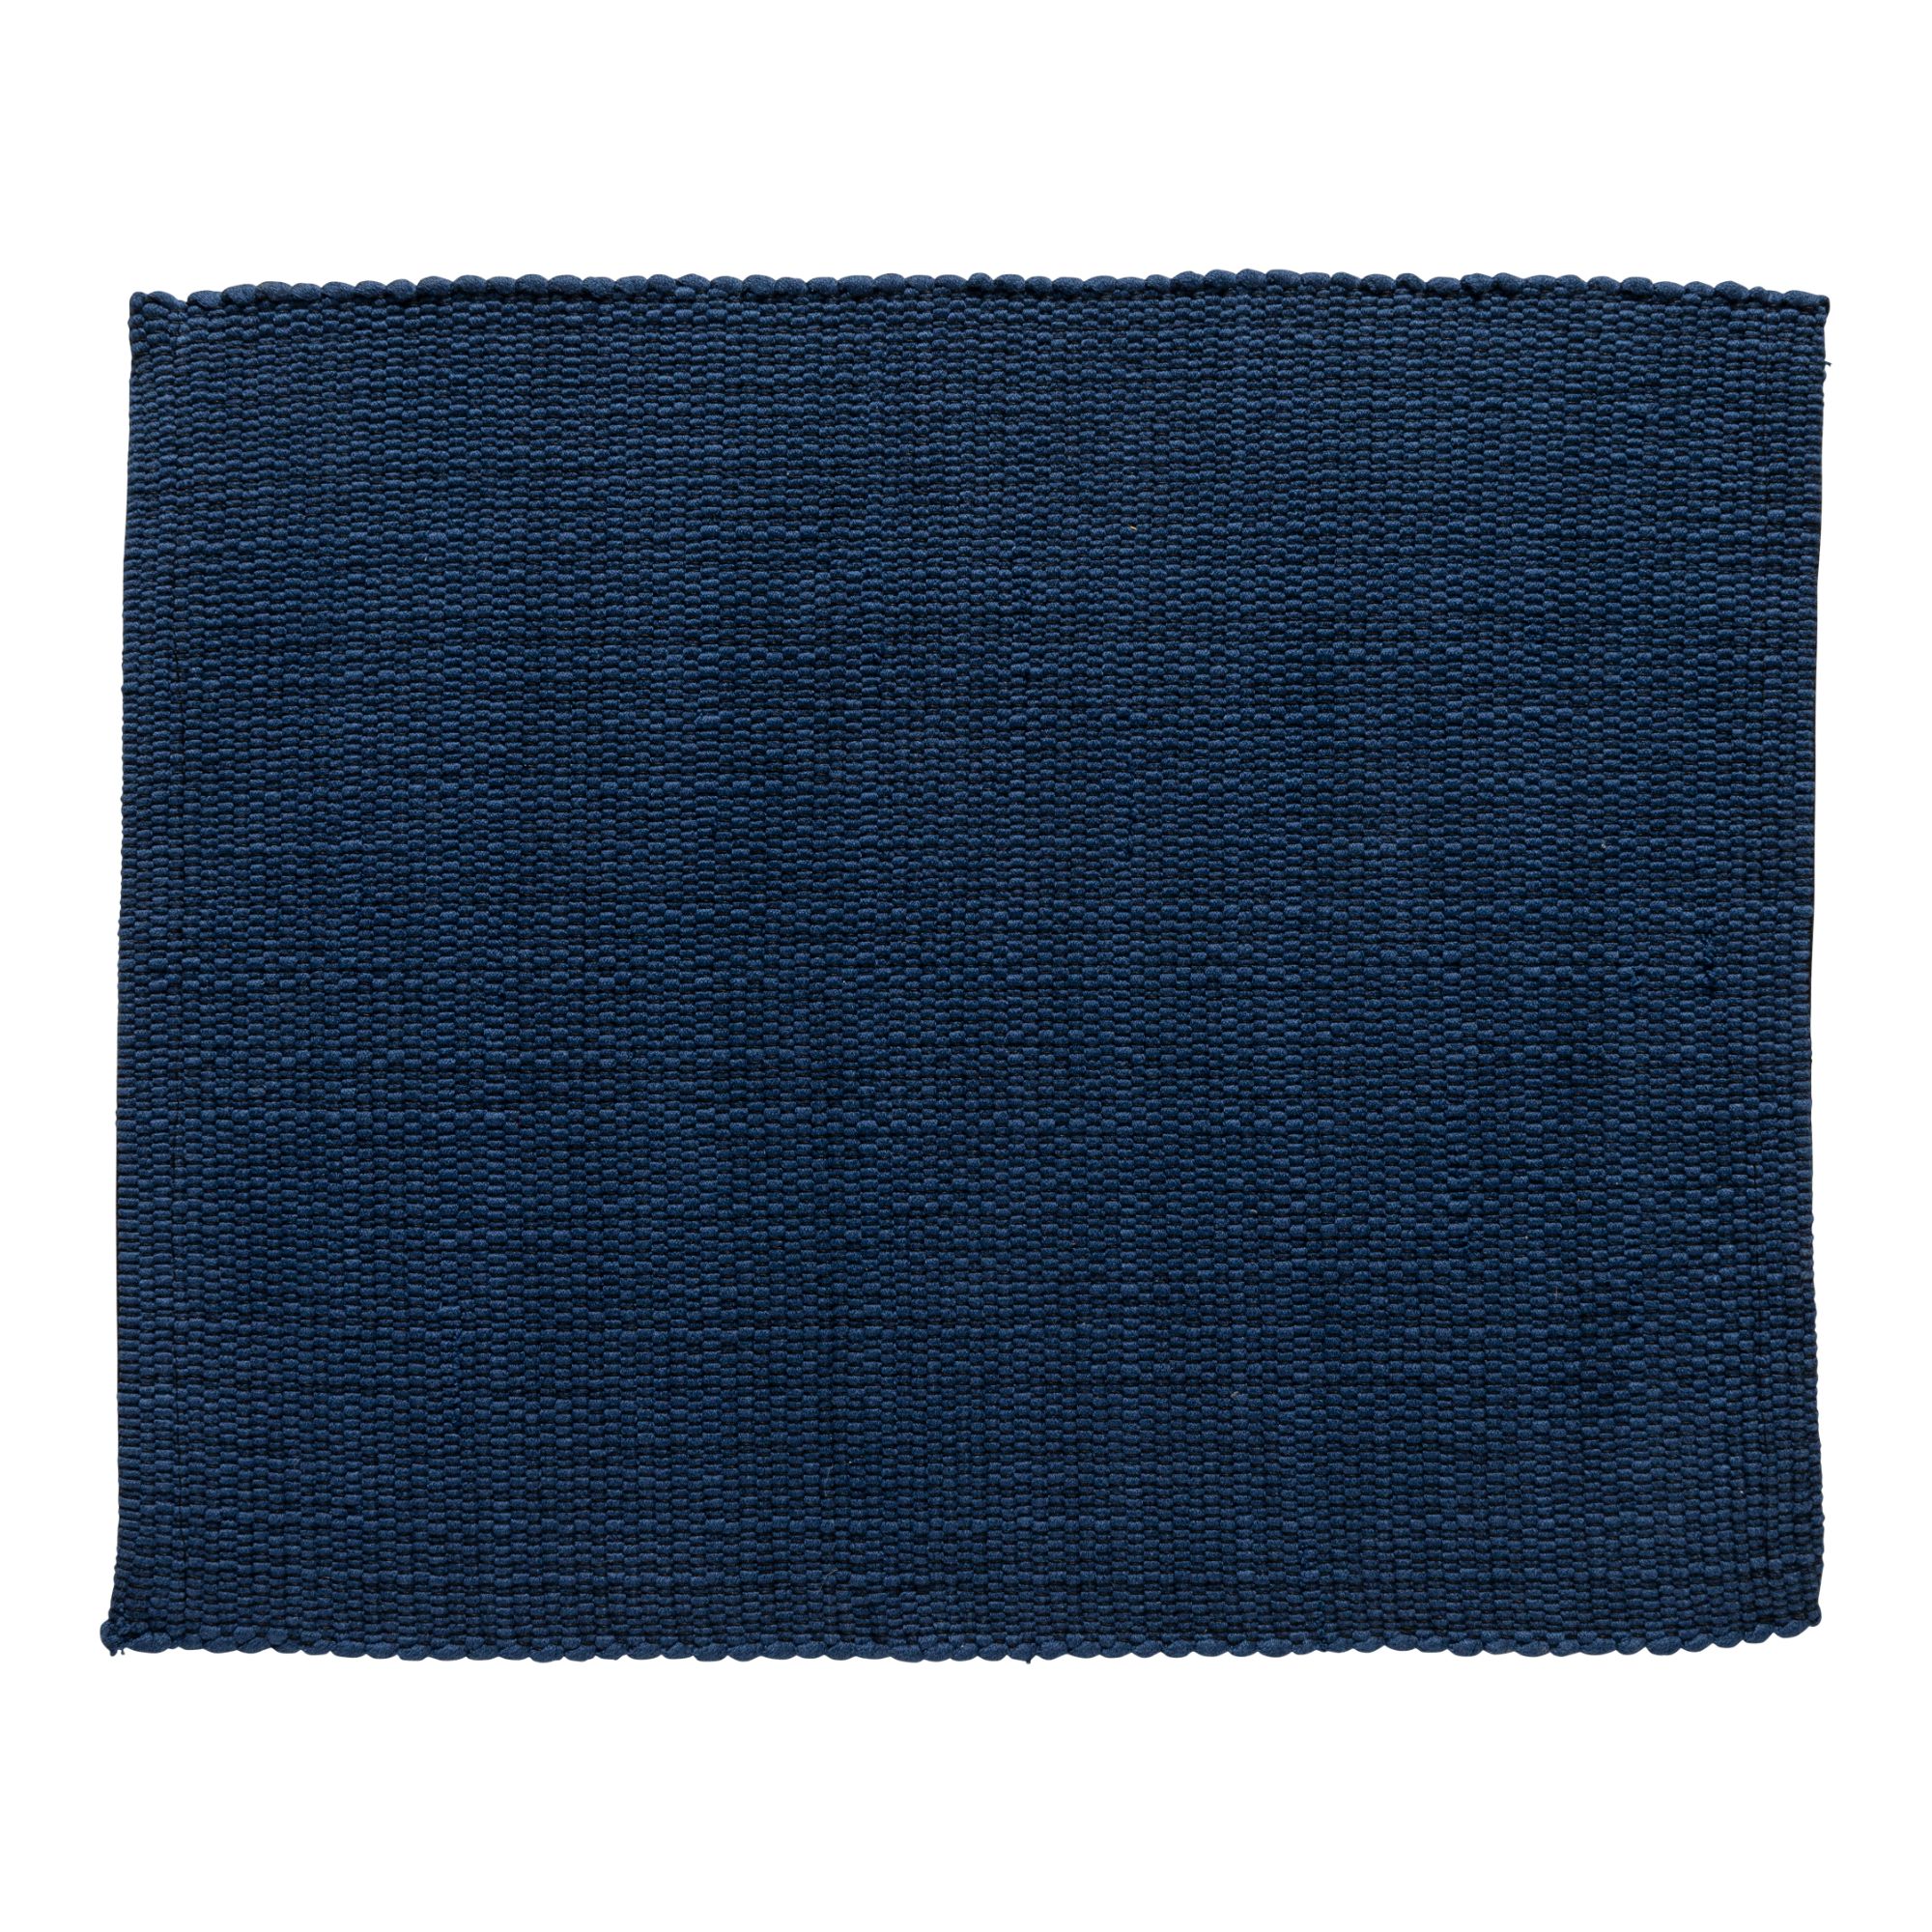 Joana Recycled Cotton Placemat Blue 30cm X 40cm Gift